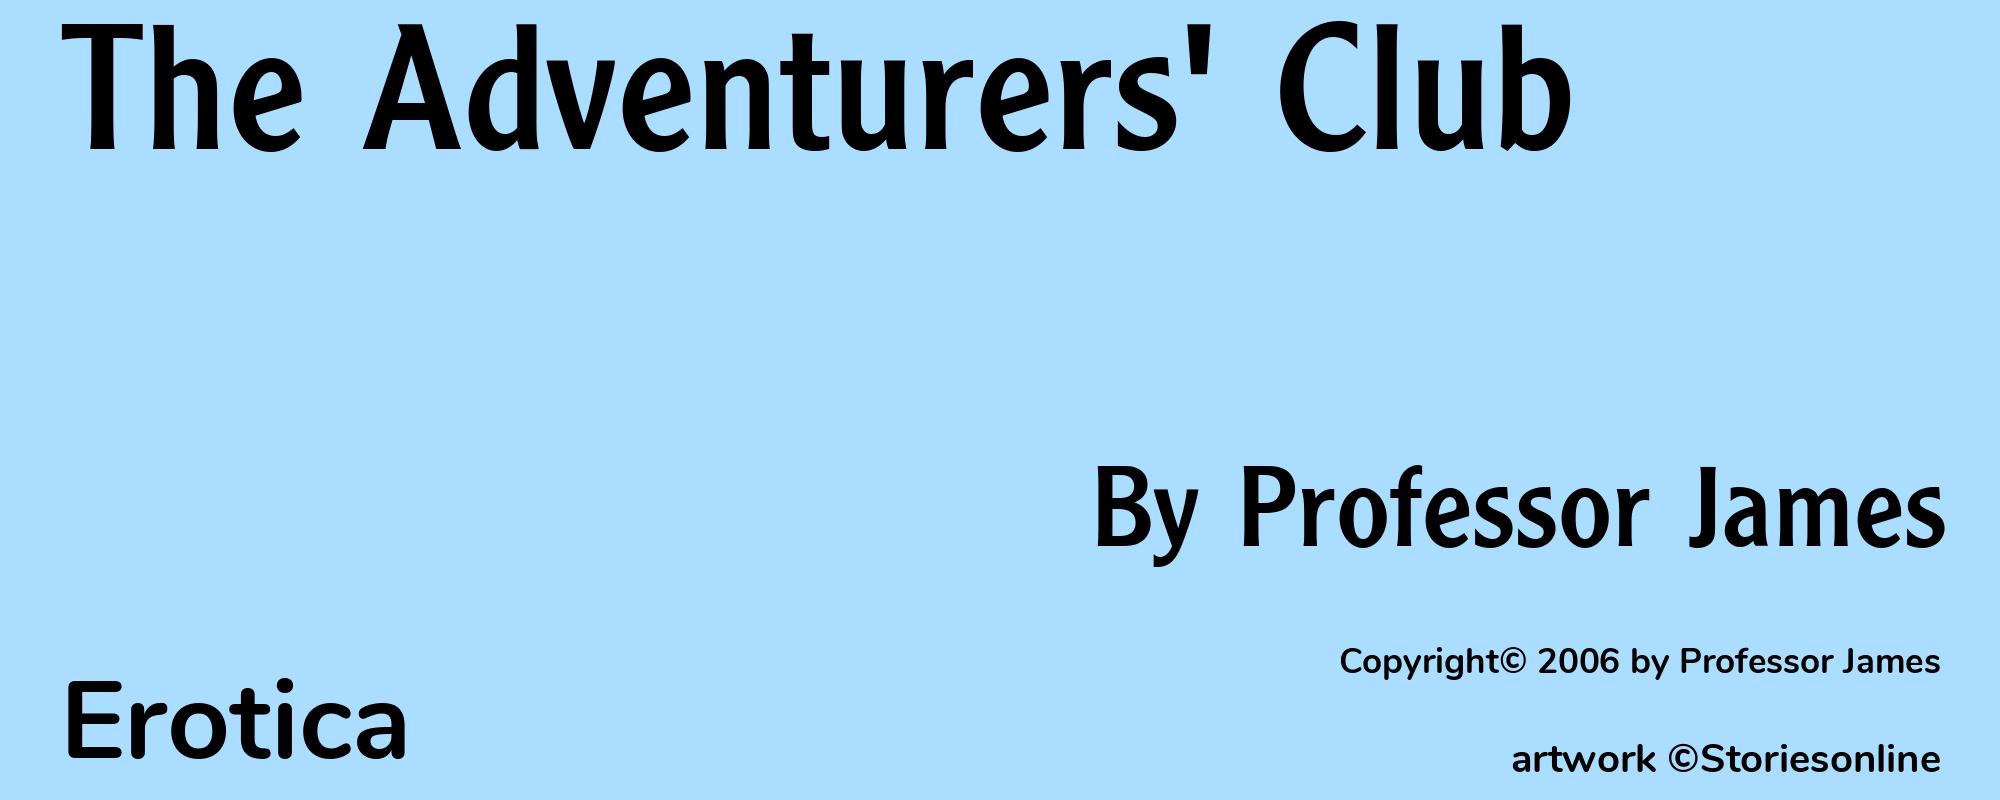 The Adventurers' Club - Cover